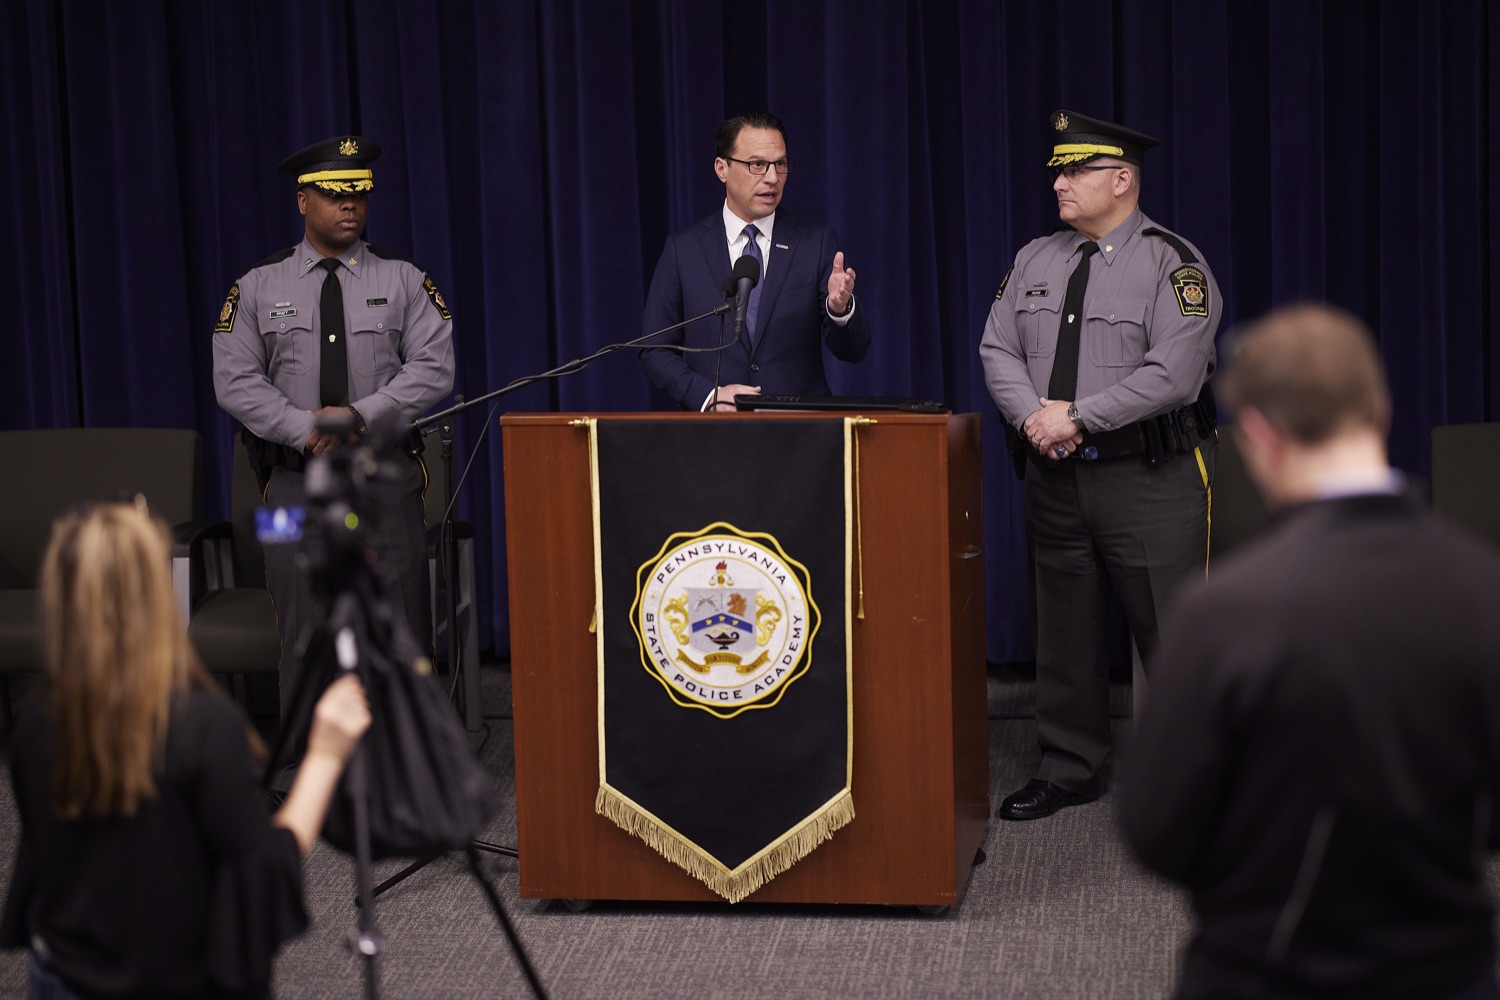 Pennsylvania Governor Josh Shapiro speaks with the press.   Governor Josh Shapiro visits the Pennsylvania State Police Academy to meet the current classes of Cadets, tour the Academy, and hold a press conference to highlight the crucial investments his budget makes to support law enforcement and invest in public safety.  MARCH 08, 2023 - HERSHEY, PA<br><a href="https://filesource.amperwave.net/commonwealthofpa/photo/22760_gov_publicSafety_dz_0019.JPG" target="_blank">⇣ Download Photo</a>